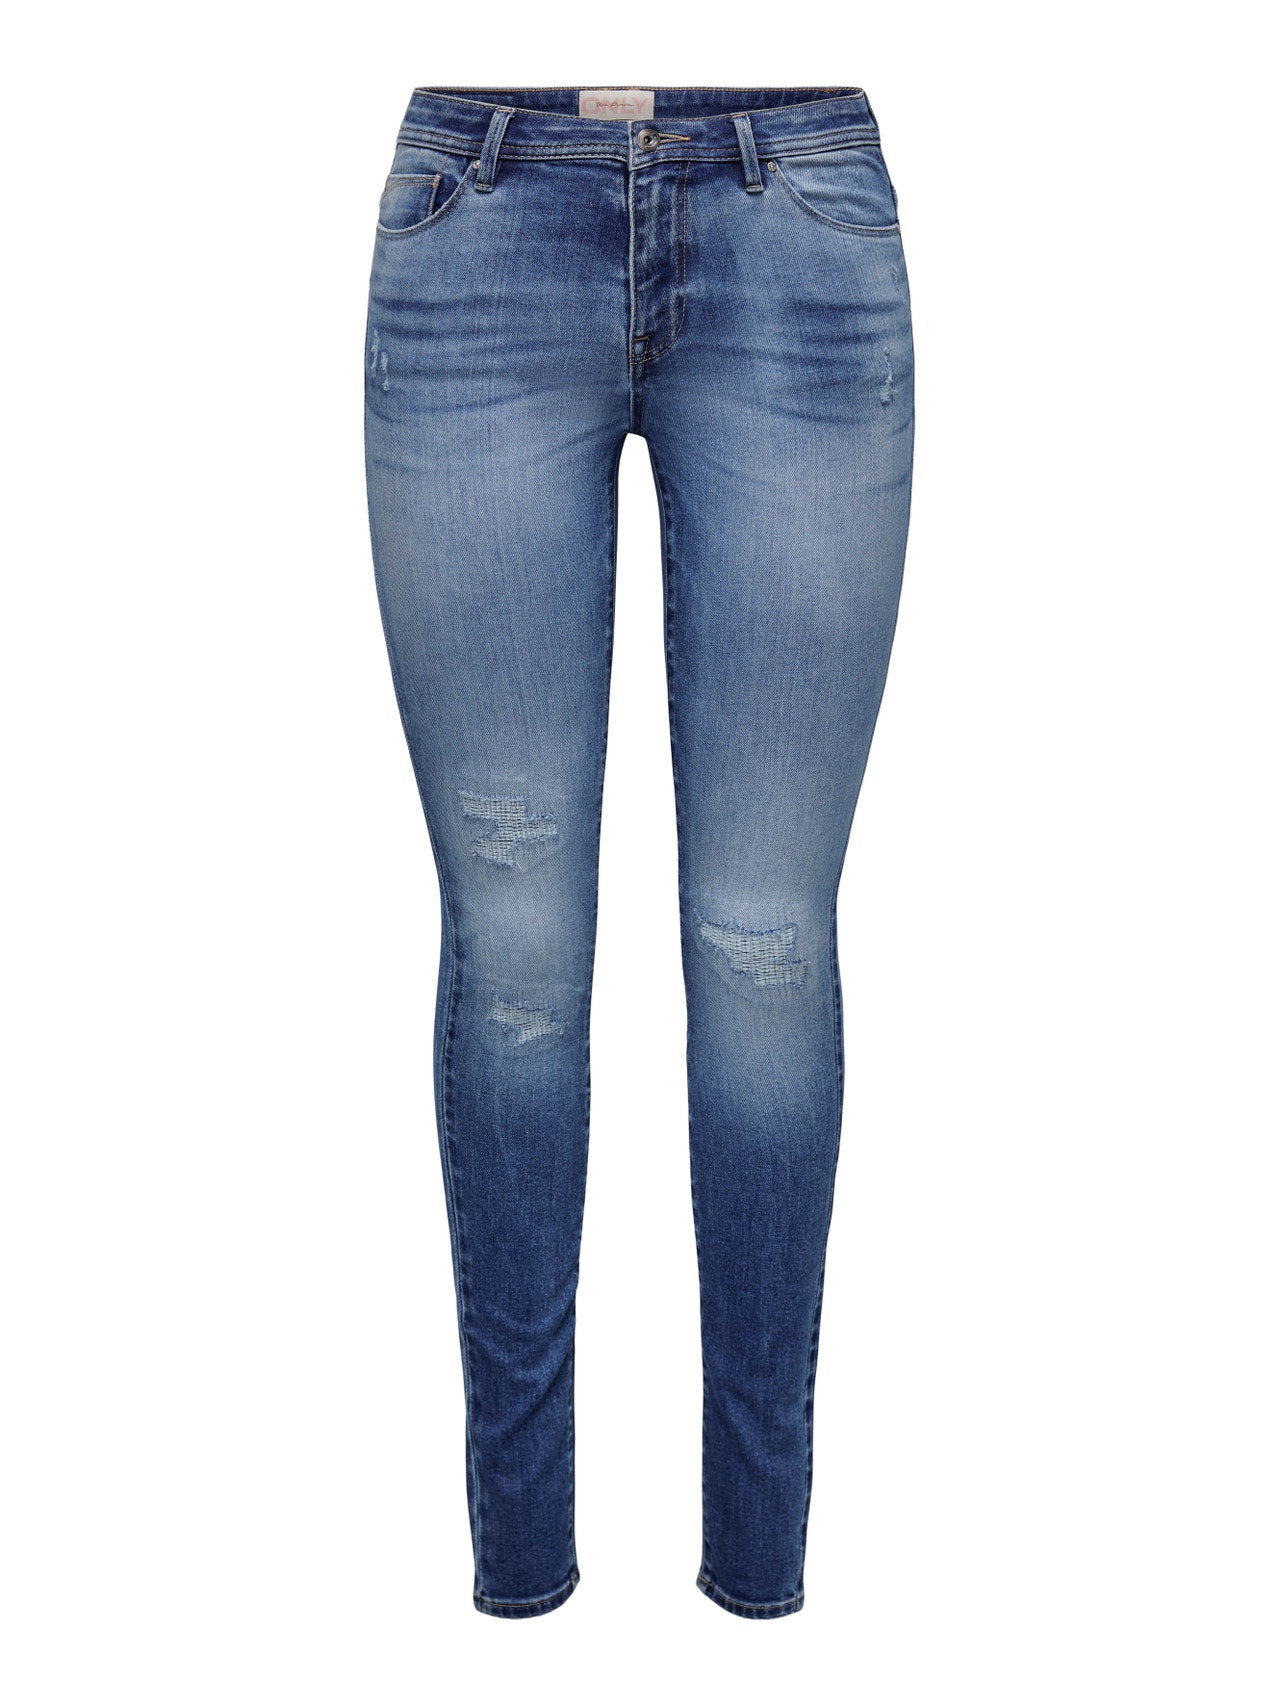 ONLY Jeans Skinny Fit Taille moyenne -Medium Blue Denim - 15263742